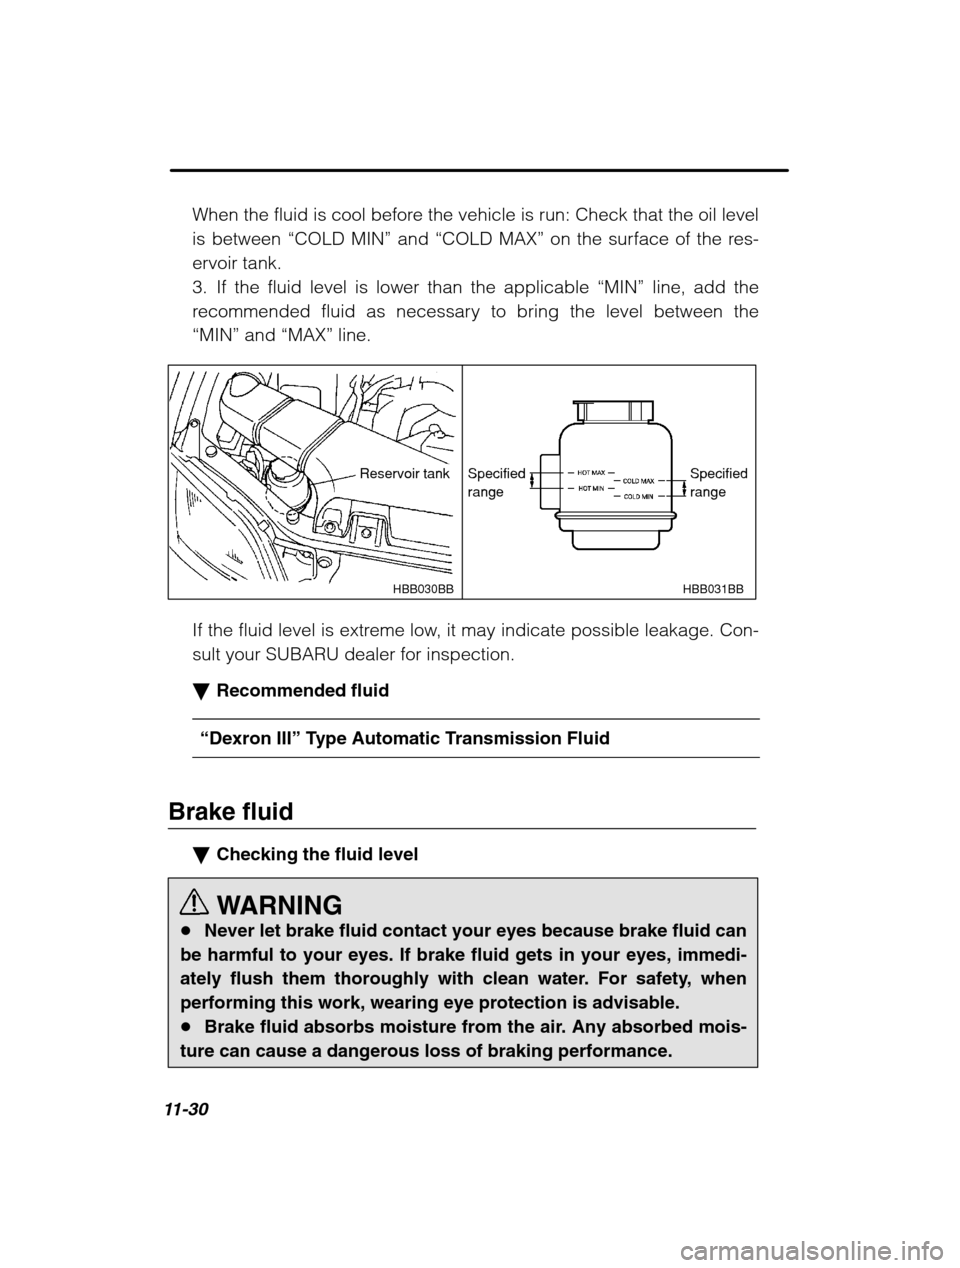 SUBARU FORESTER 2002 SG / 2.G Owners Manual 11-30
When the fluid is cool before the vehicle is run: Check that the oil level is between “COLD MIN ” and  “COLD MAX ” on the surface of the res-
ervoir tank.
3. If the fluid level is lower 